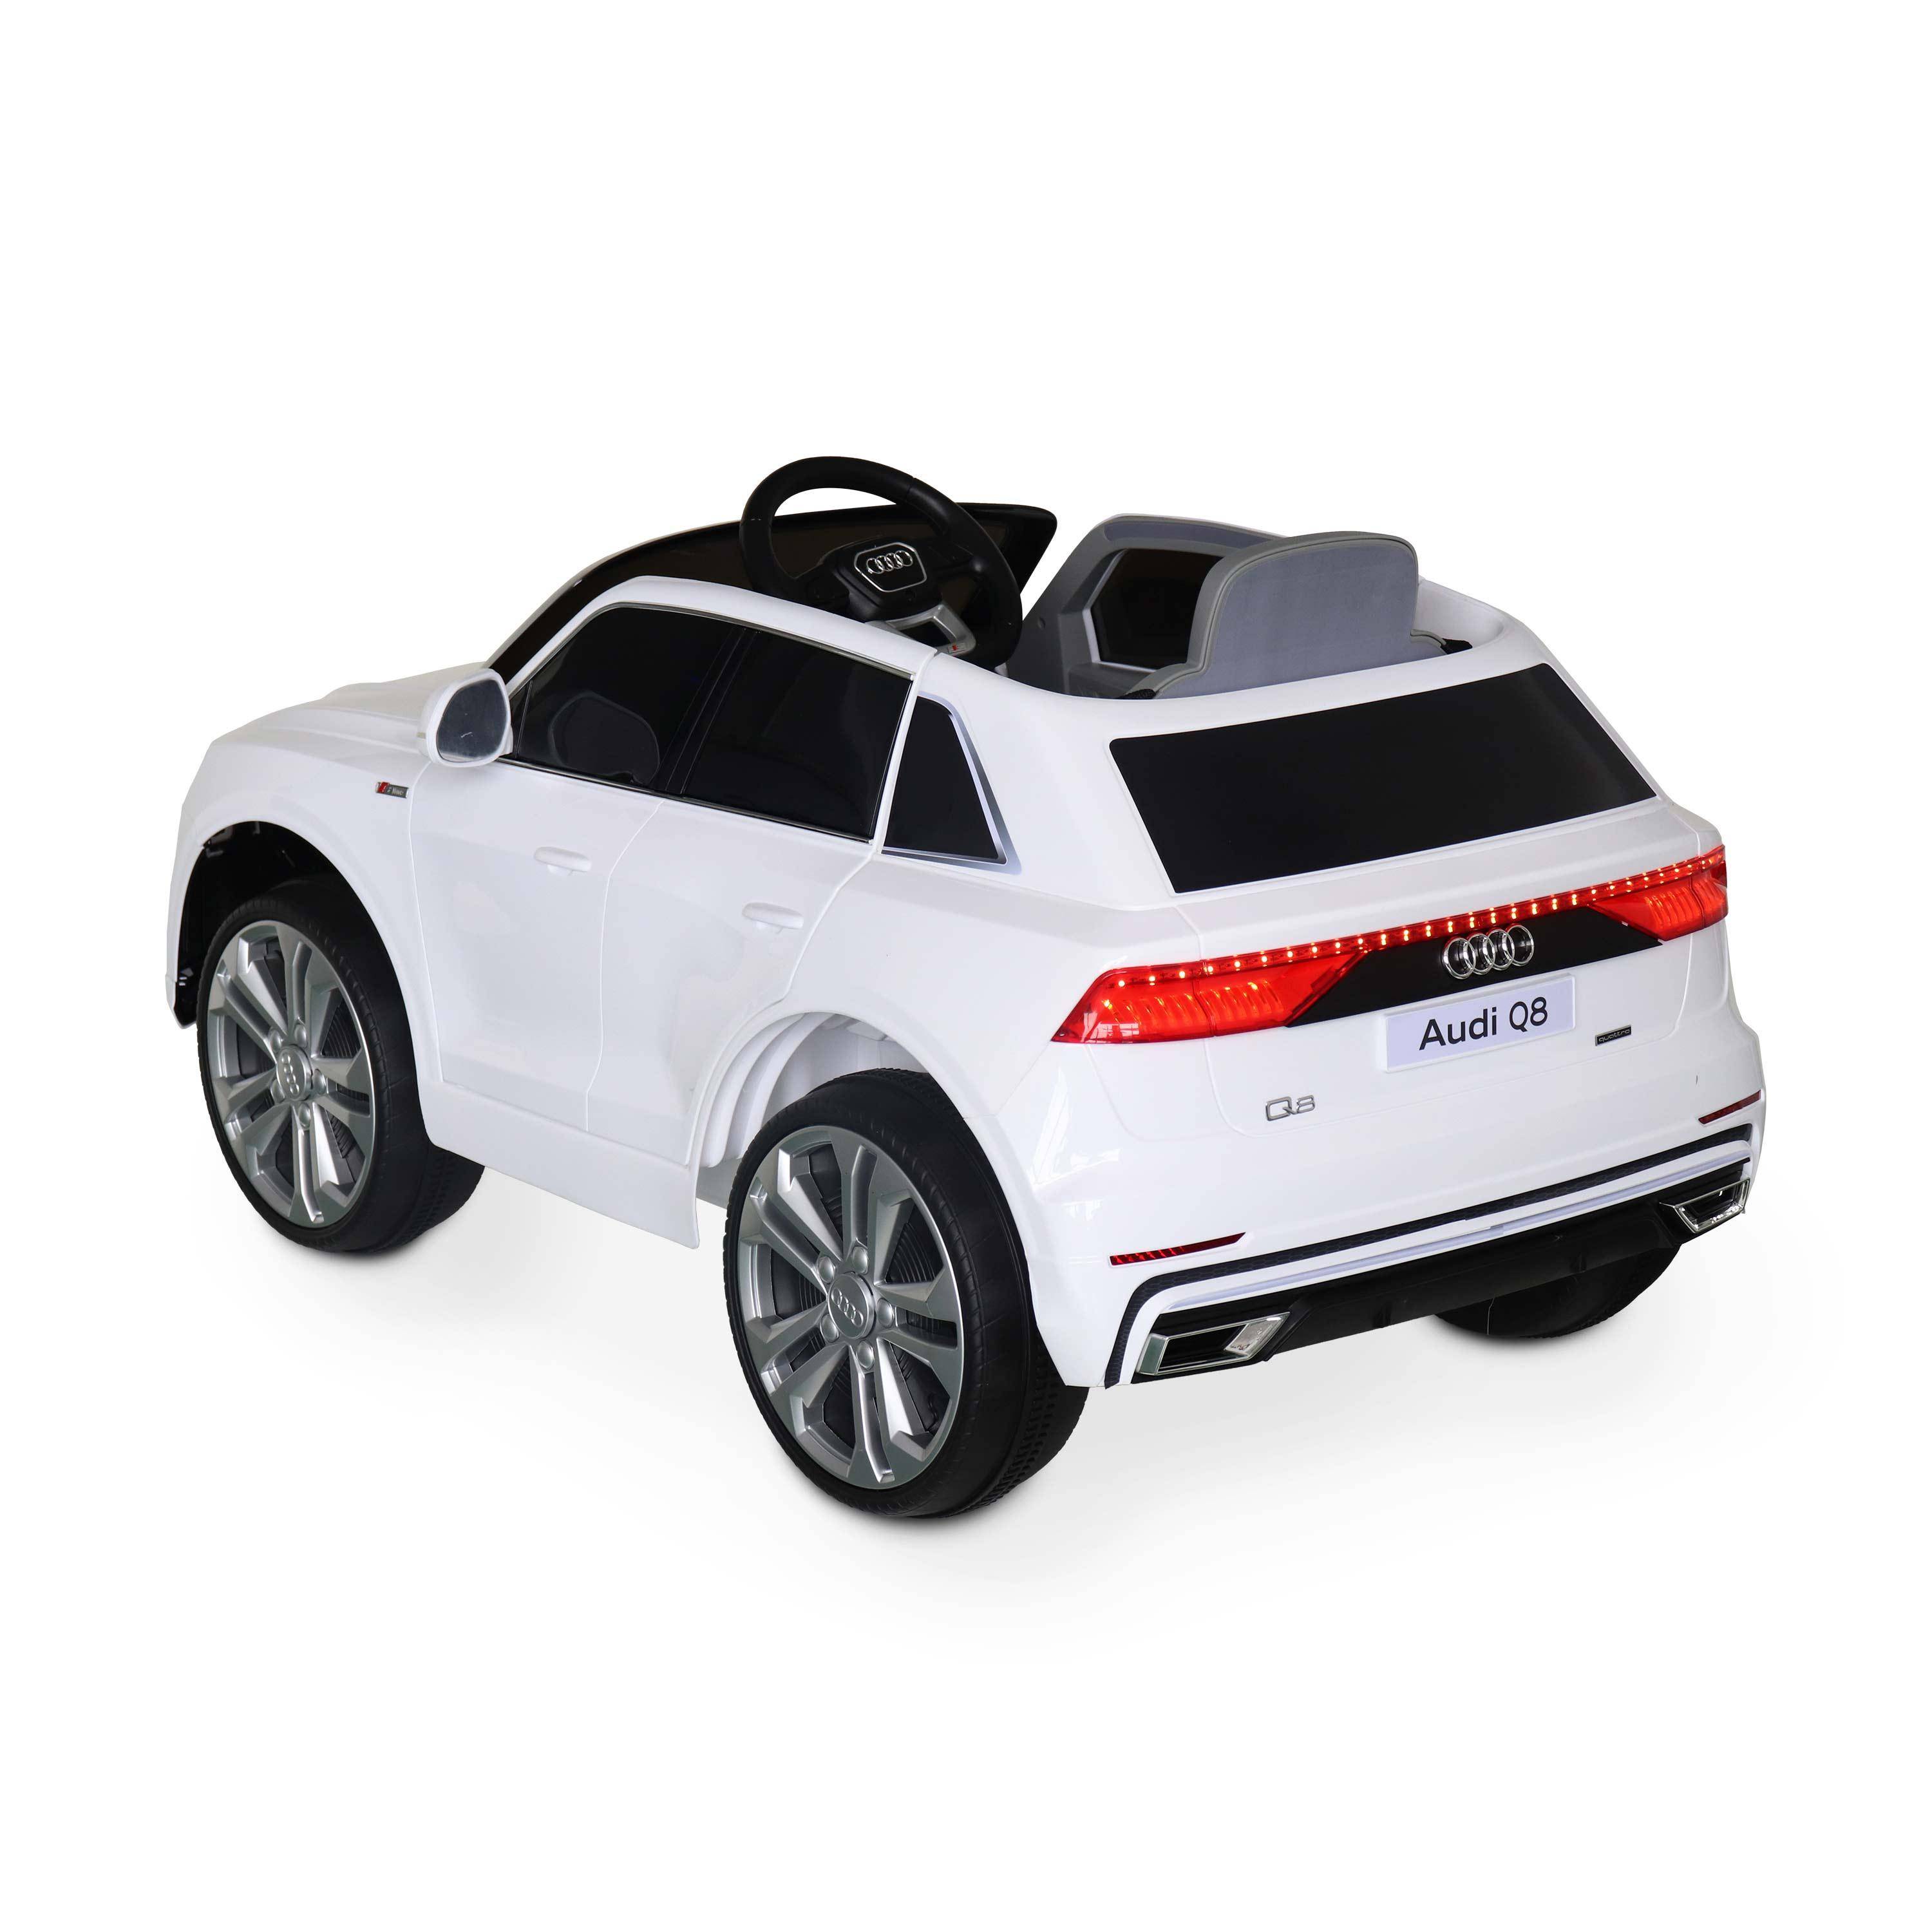 Children's electric car 12V, 1 seat with car radio and remote control - AUDI Q8 - White,sweeek,Photo3